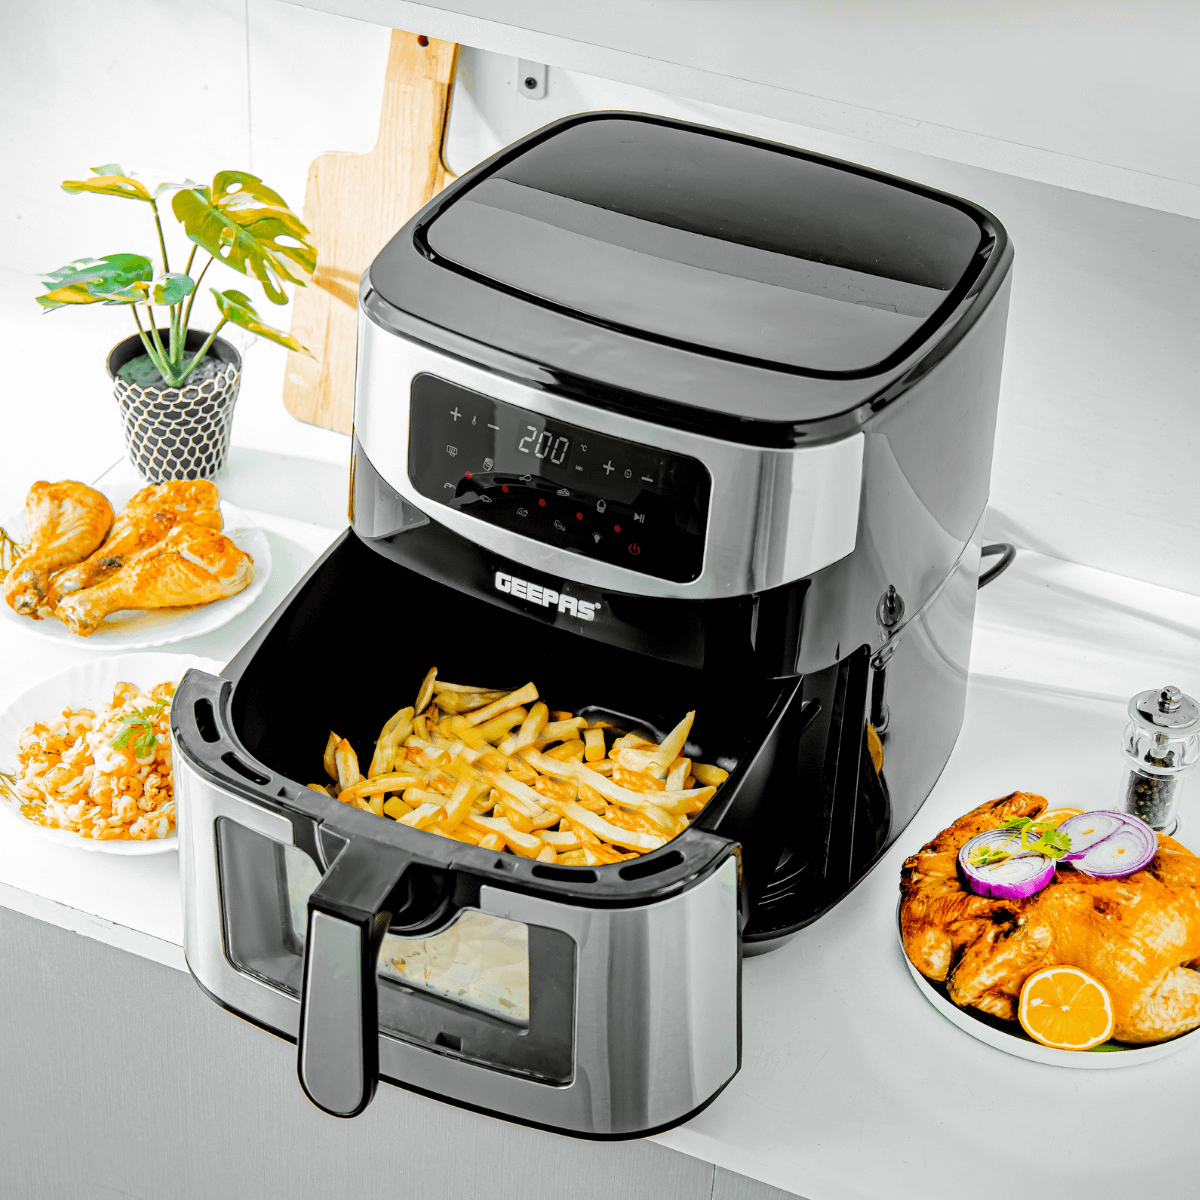 The 9.2L vortex air fryer with different dishes around it on top of a kitchen countertop.